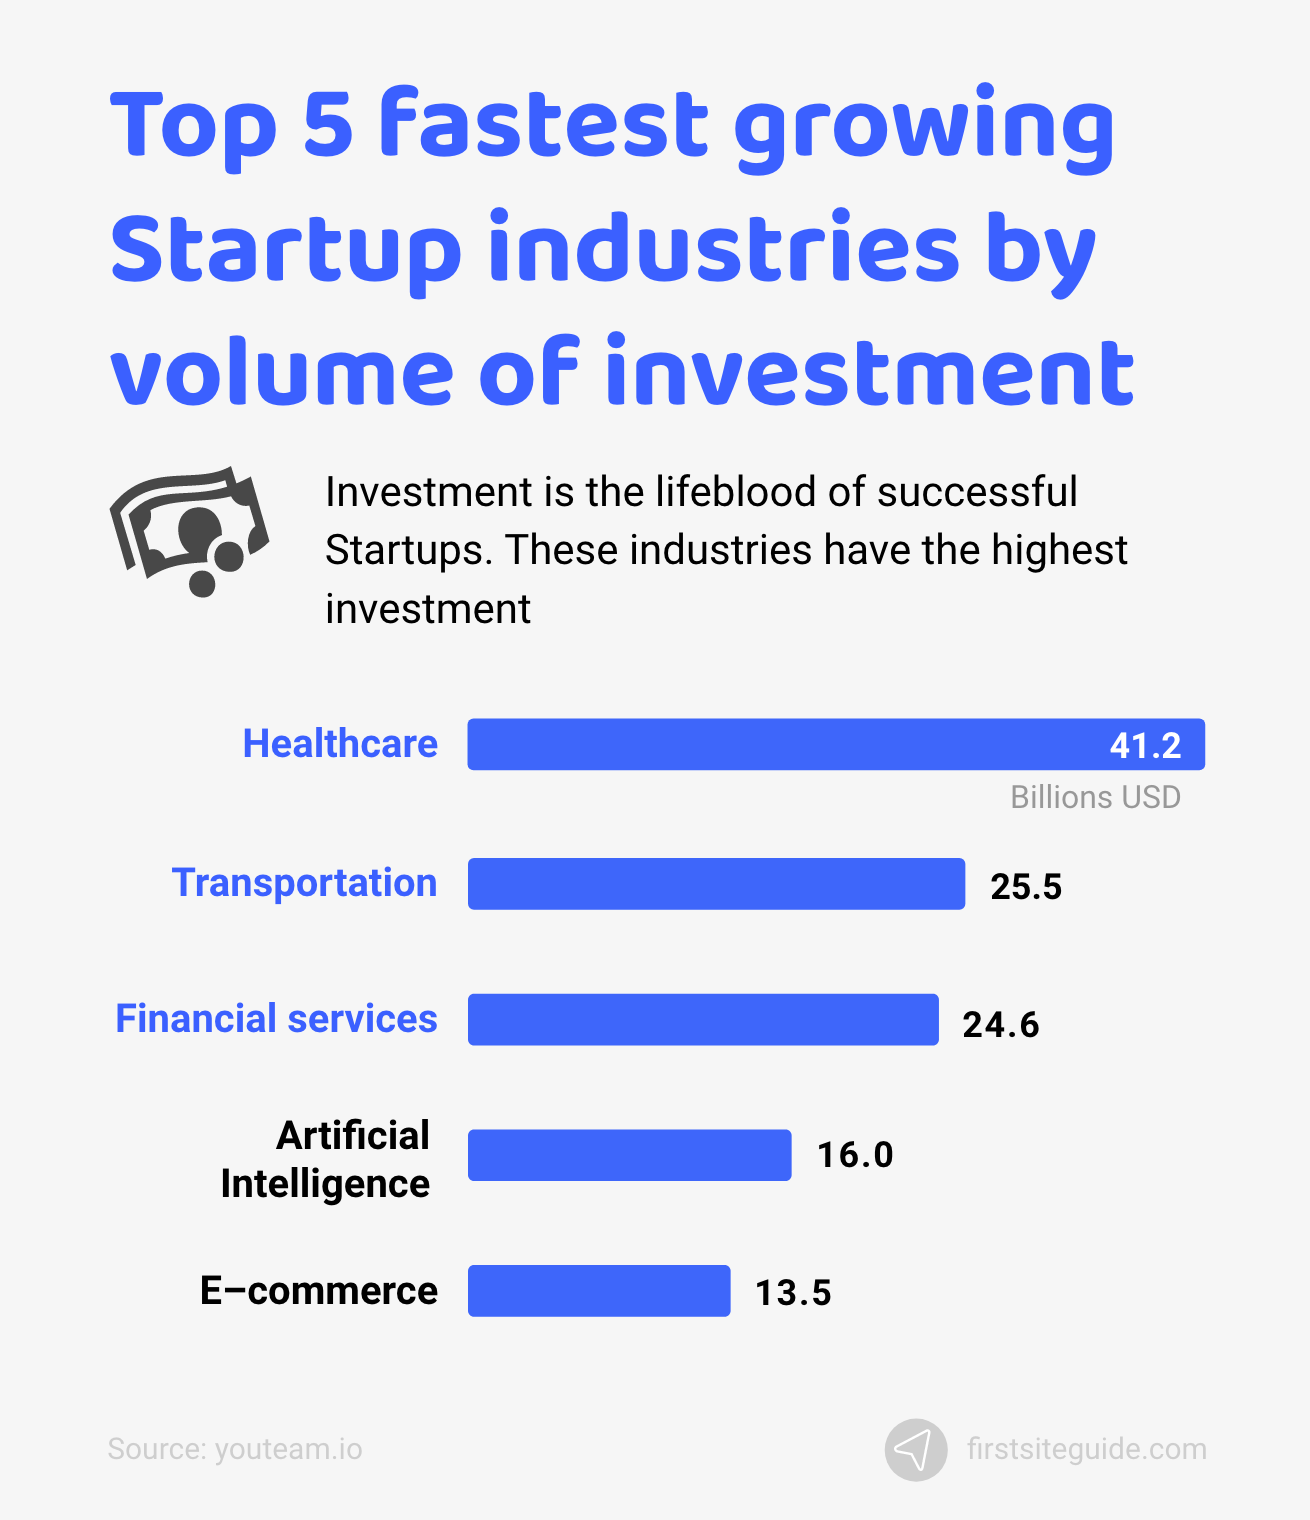 Top 5 fastest growing Startup industries by volume of investment